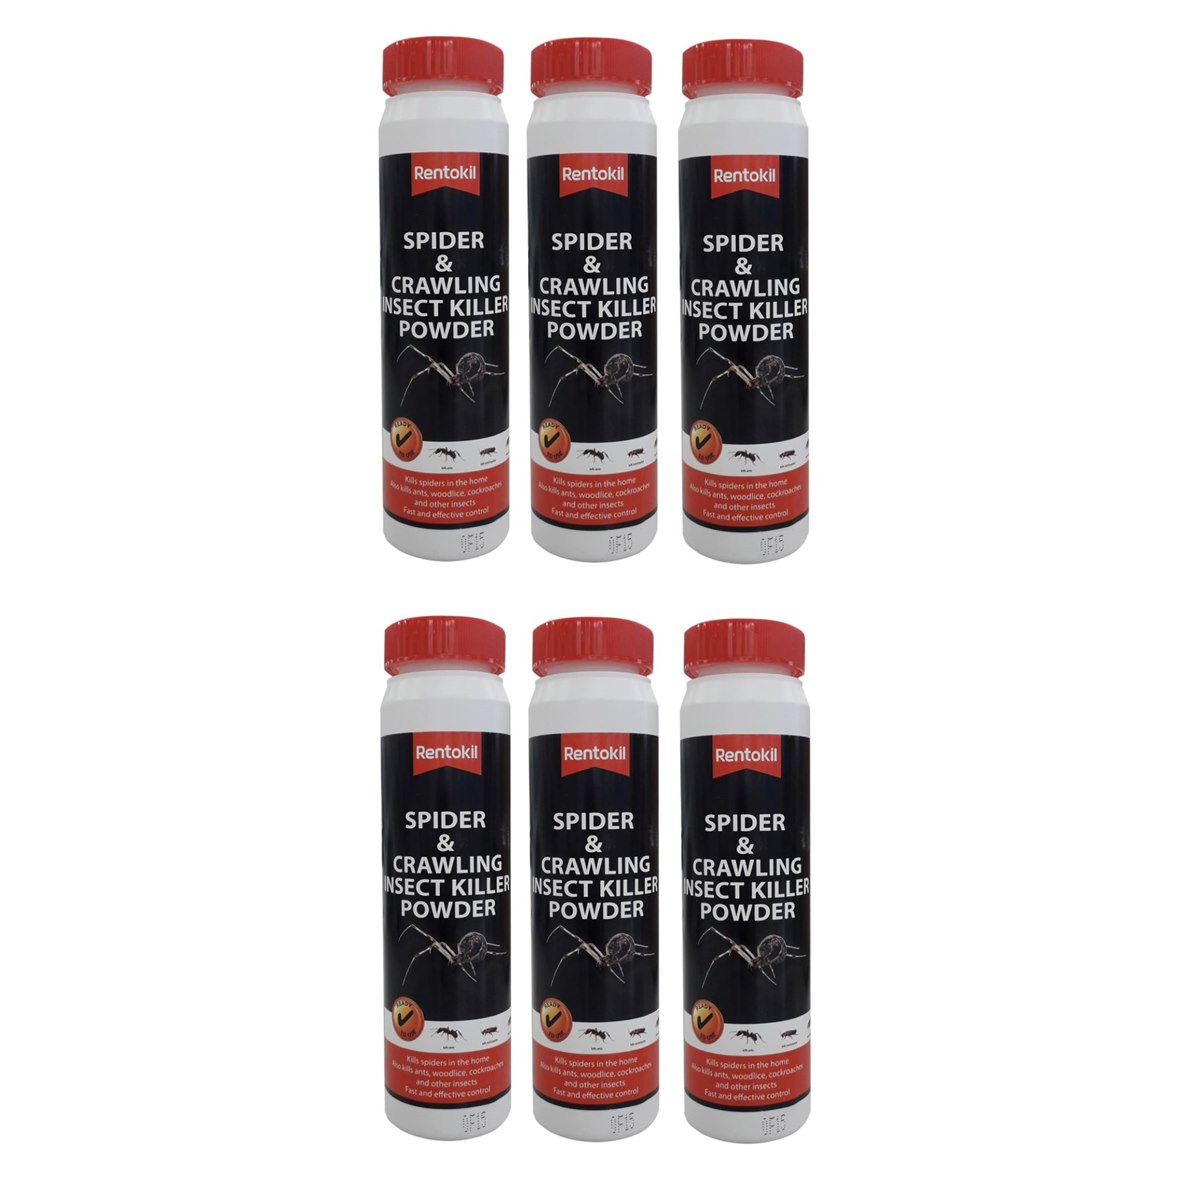 Case of 6 x Rentokil Spider & Crawling Insect Killer Powder 150g